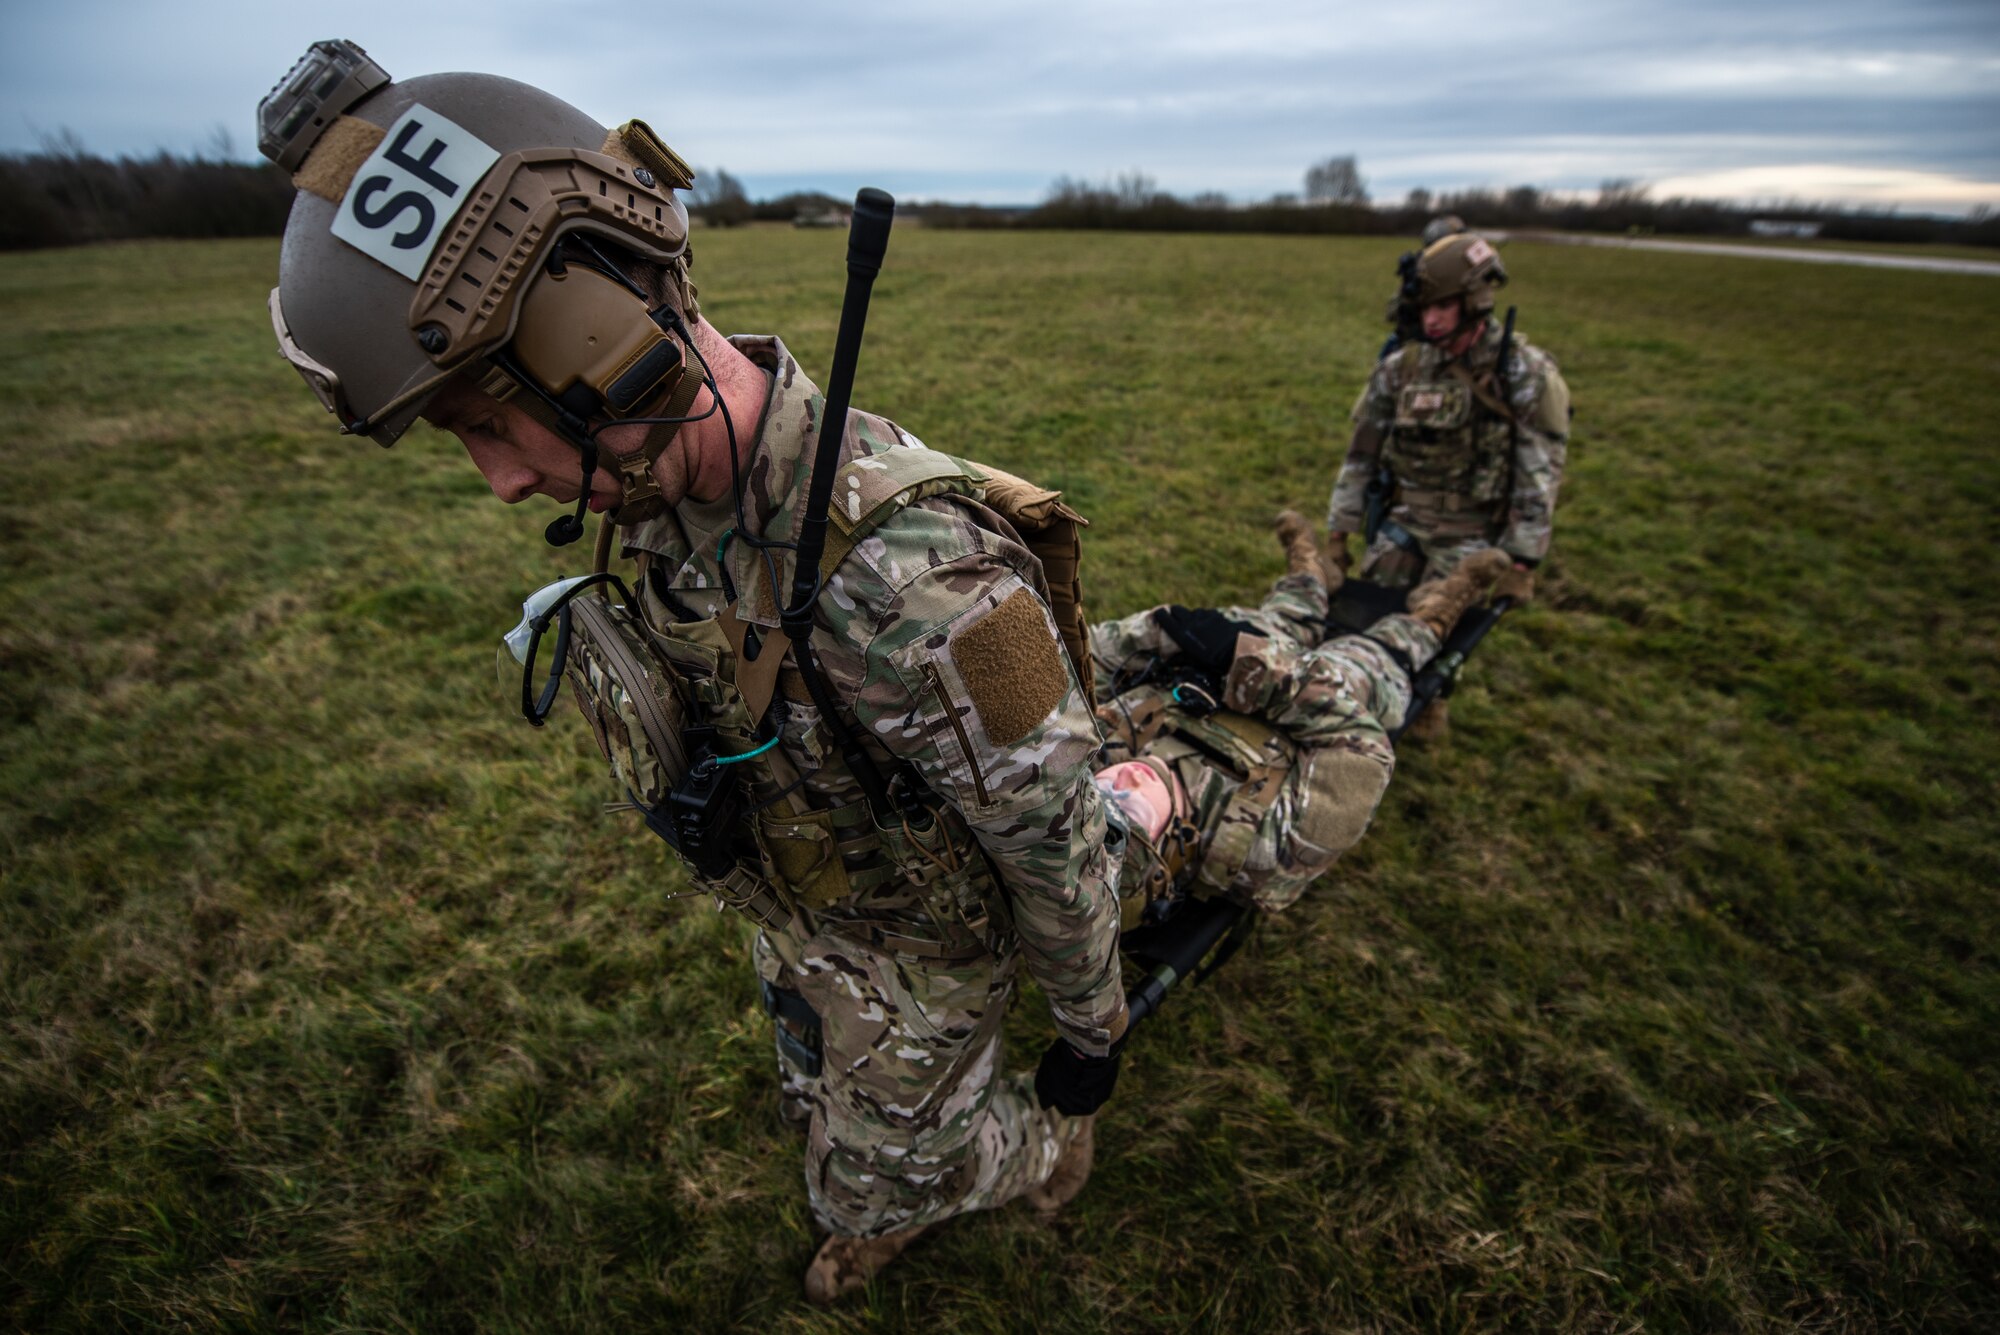 U.S. Air Force Staff Sgt. Taylor Sutton, 435th Security Forces Squadron ground combat readiness training center instructor, and his comrade carry a litter with a simulated casualty during exercise Frozen Defender in Grostenquin, France, Jan. 14, 2020. Frozen Defender tests the squadron’s capabilities in a contested environment under harsh conditions. The Defenders faced scenarios requiring self-aid and buddy care practices. (U.S. Air Force photo by Staff Sgt. Devin Boyer)